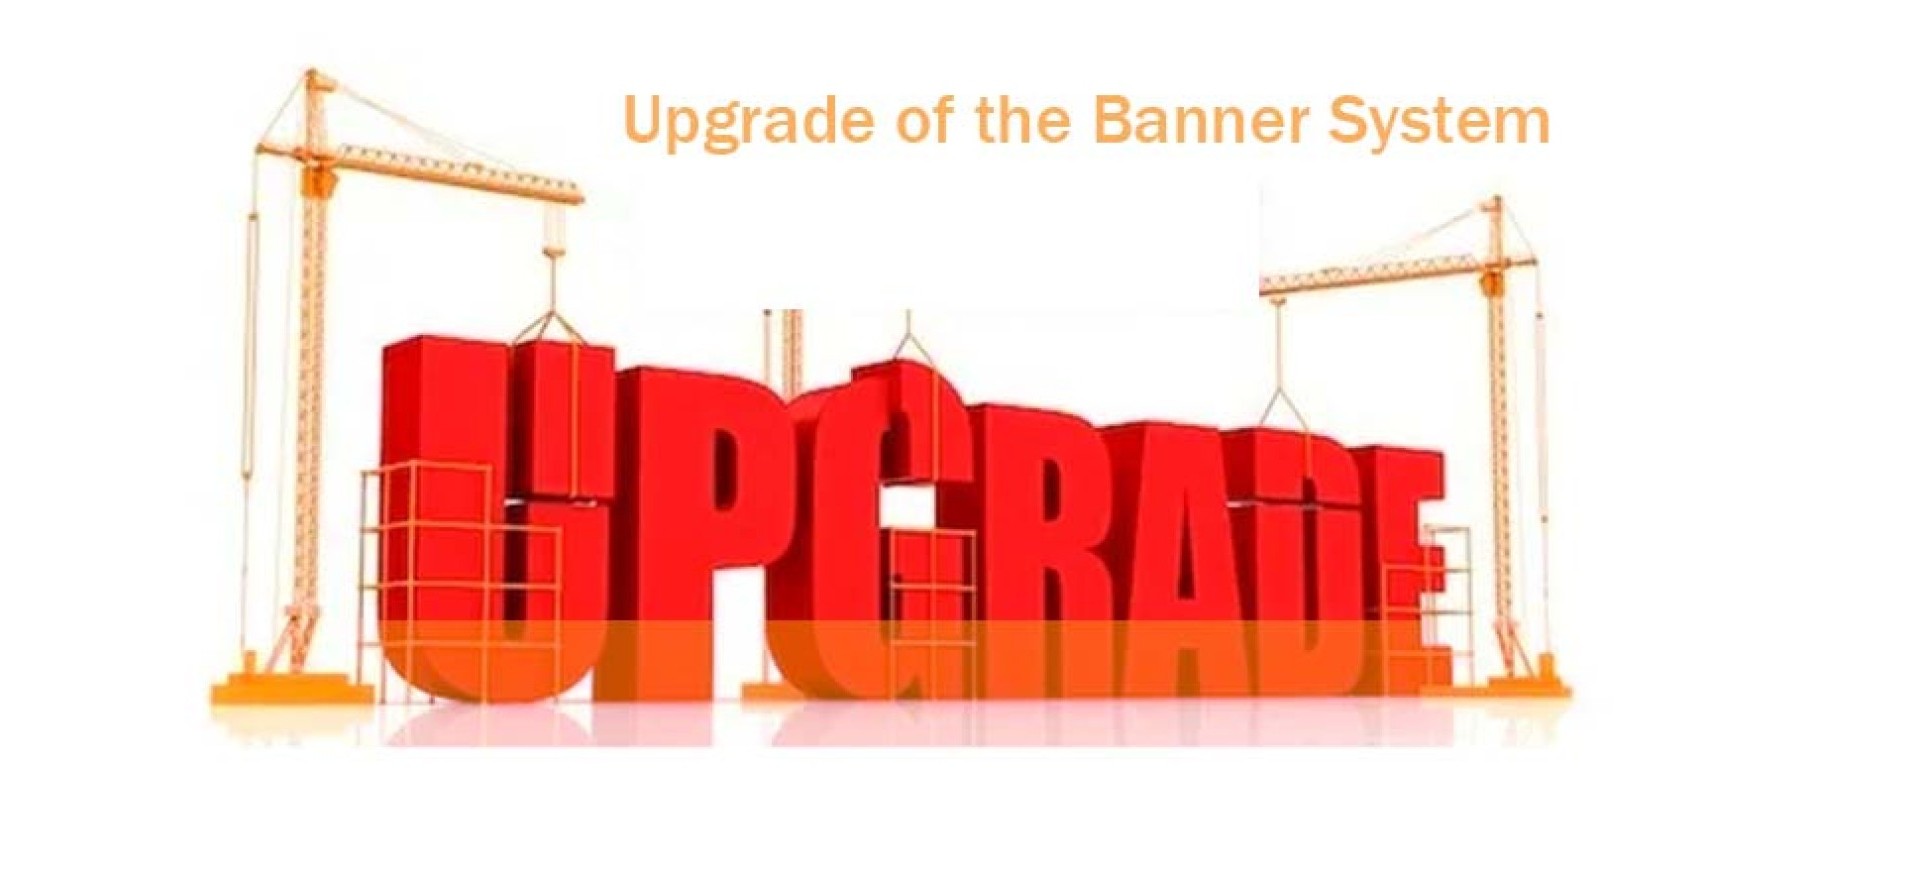 Upgrade of the Banner System